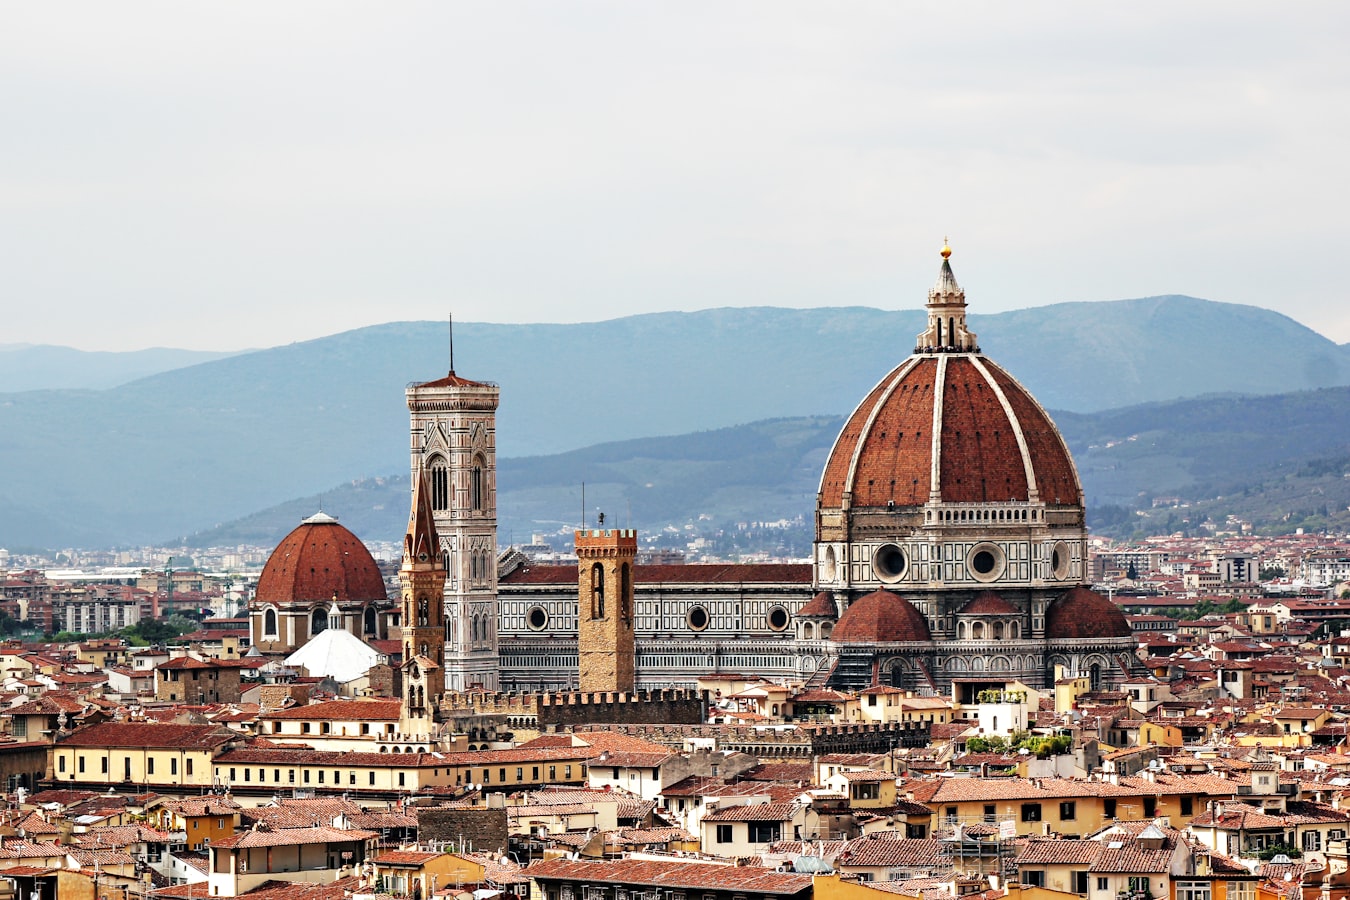 the domed Roman building in Florence